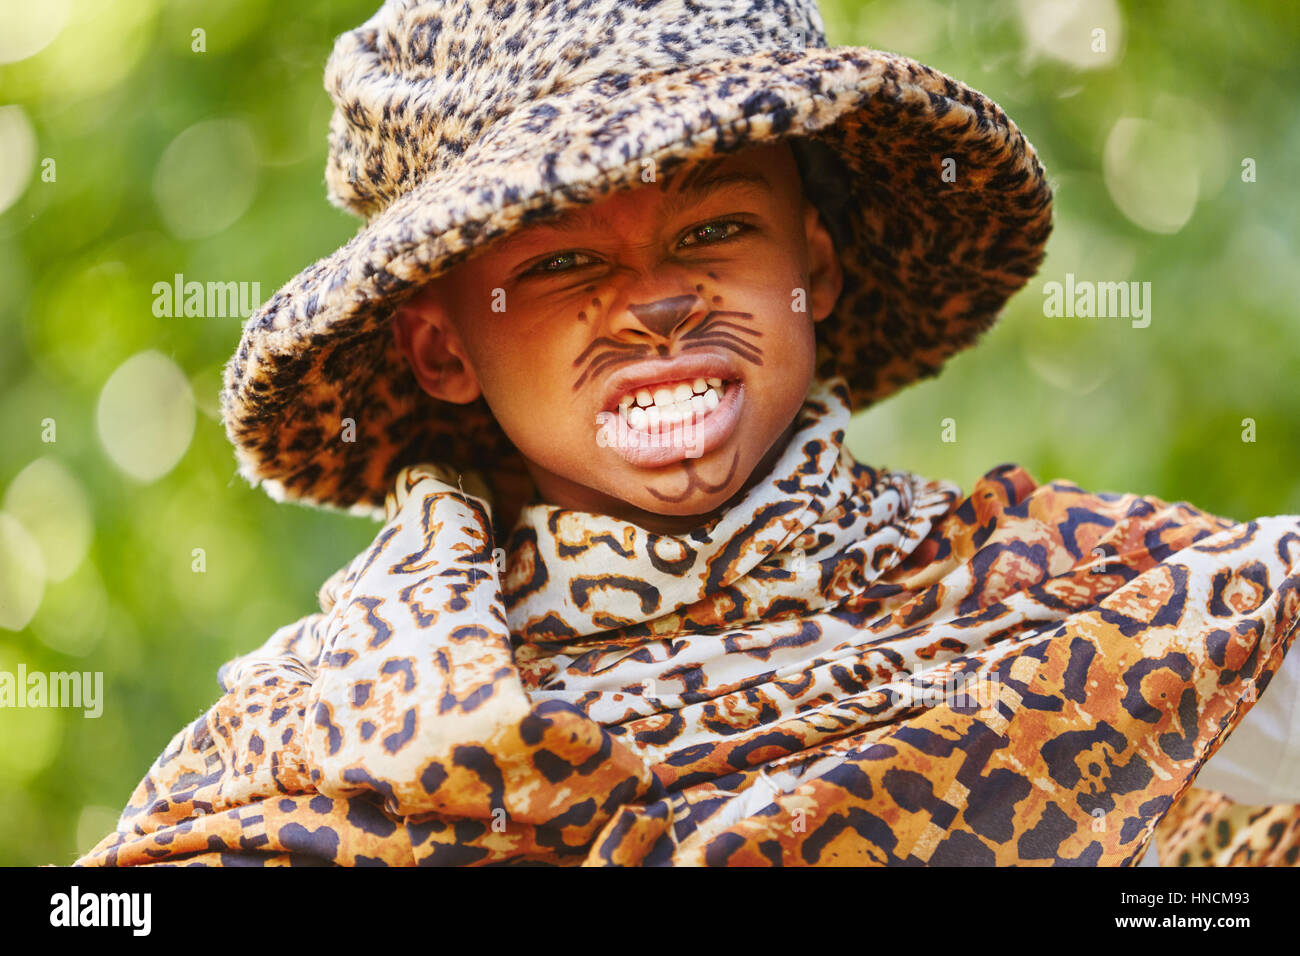 African child with creative leopard costume and face paint Stock Photo